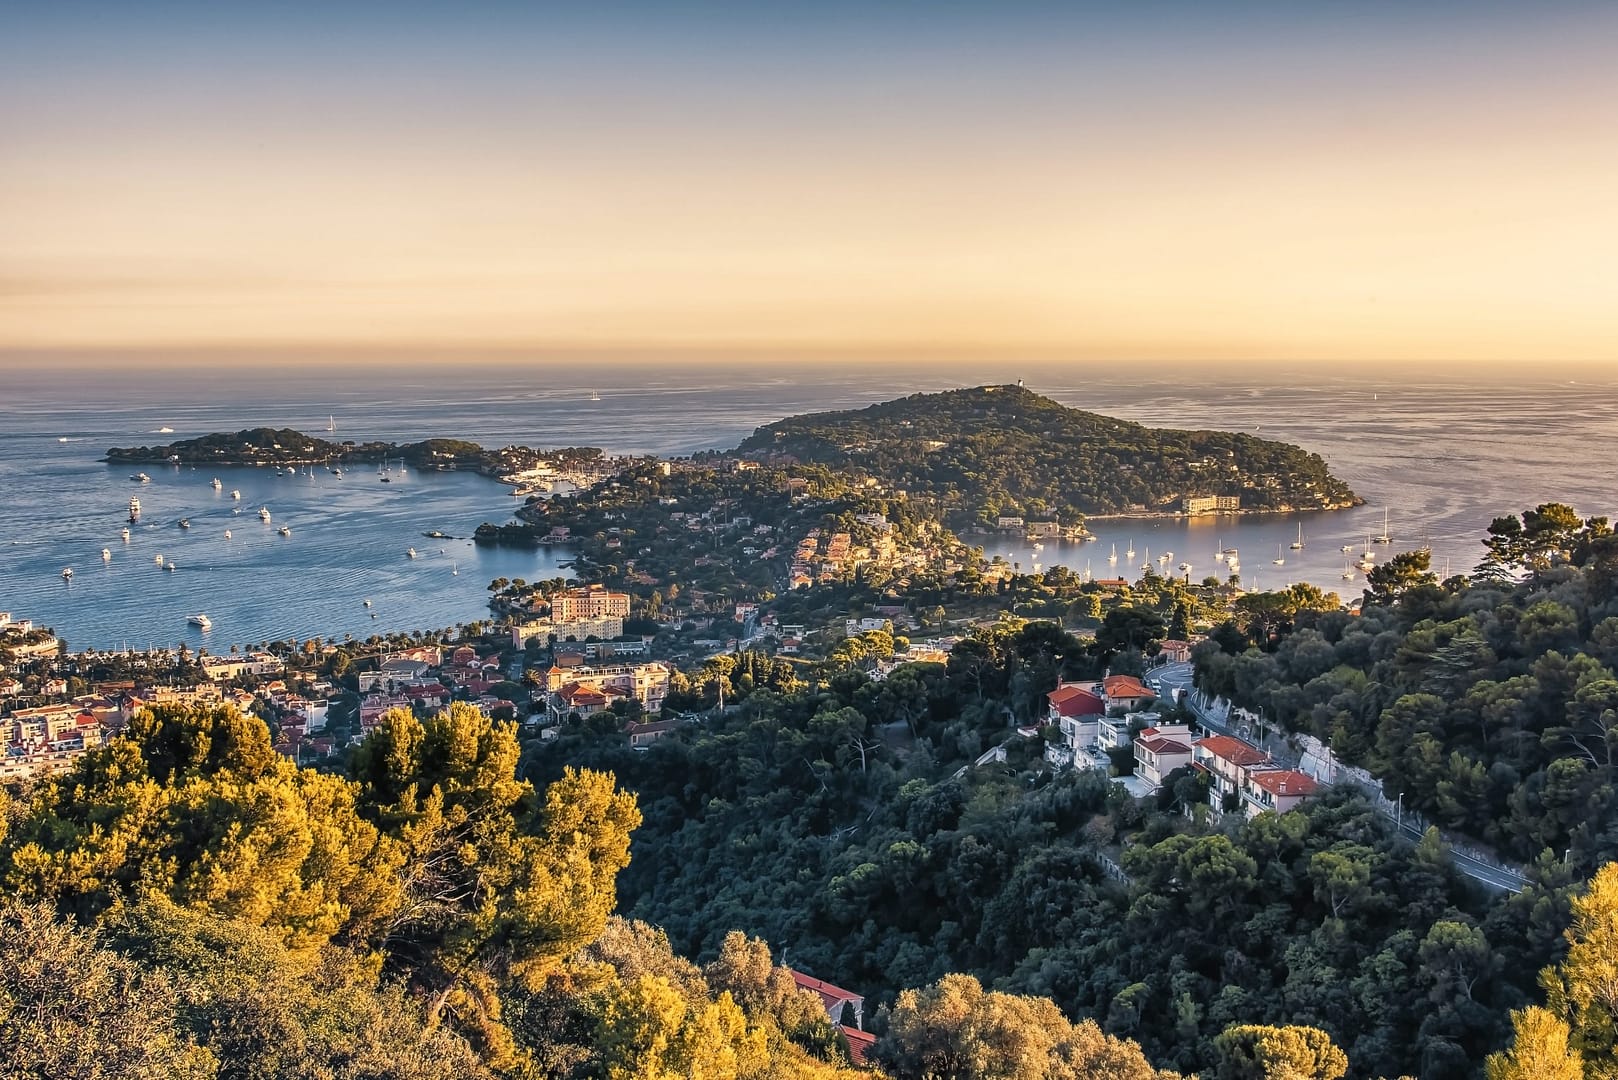 Luxury Things To Do on the French Riviera